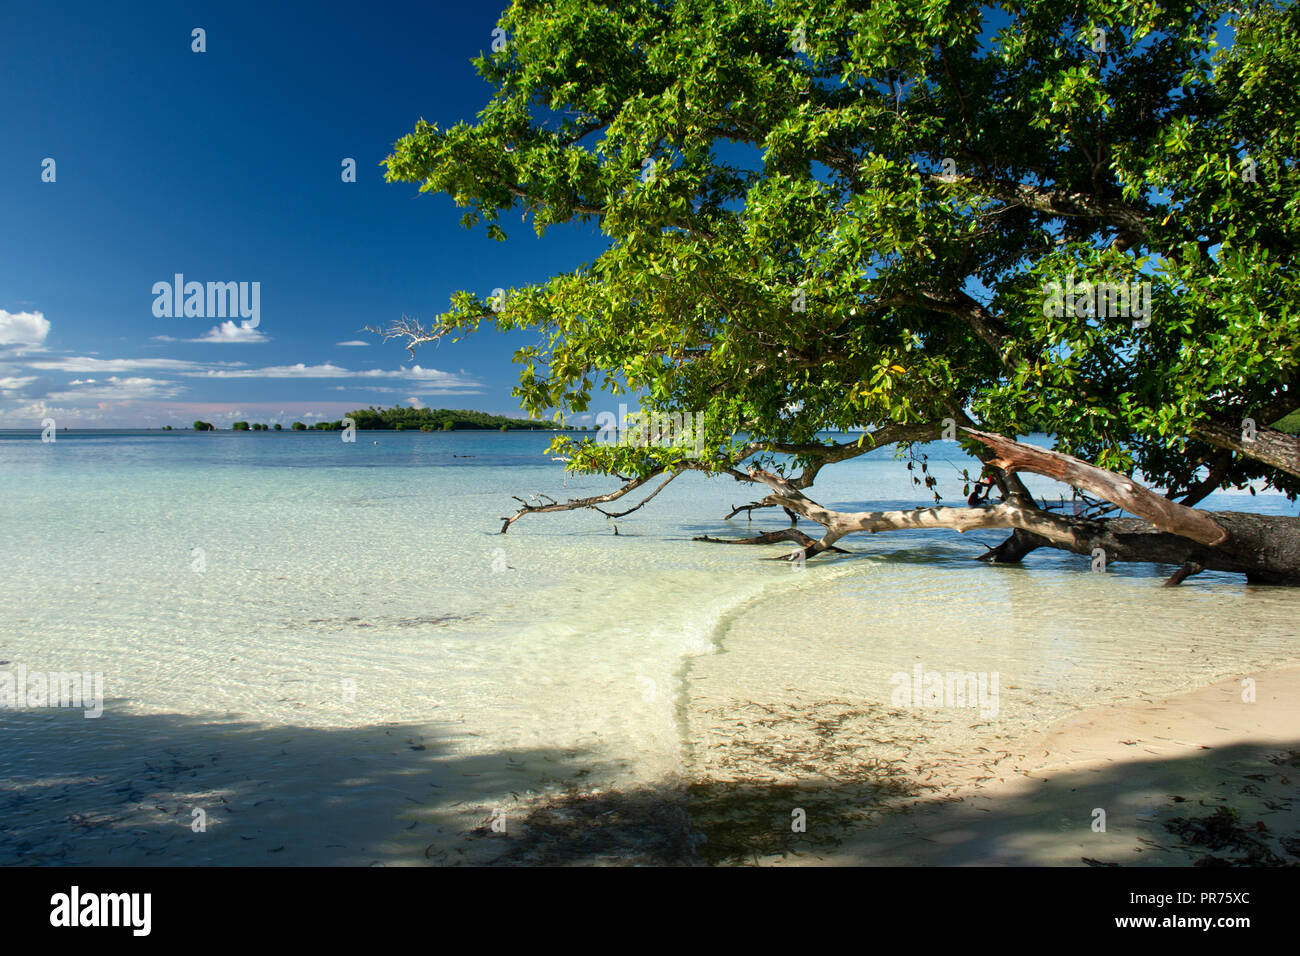 Calm tropical beach with a tree at Na Island, Pohnpei, Federated States of Micronesia Stock Photo